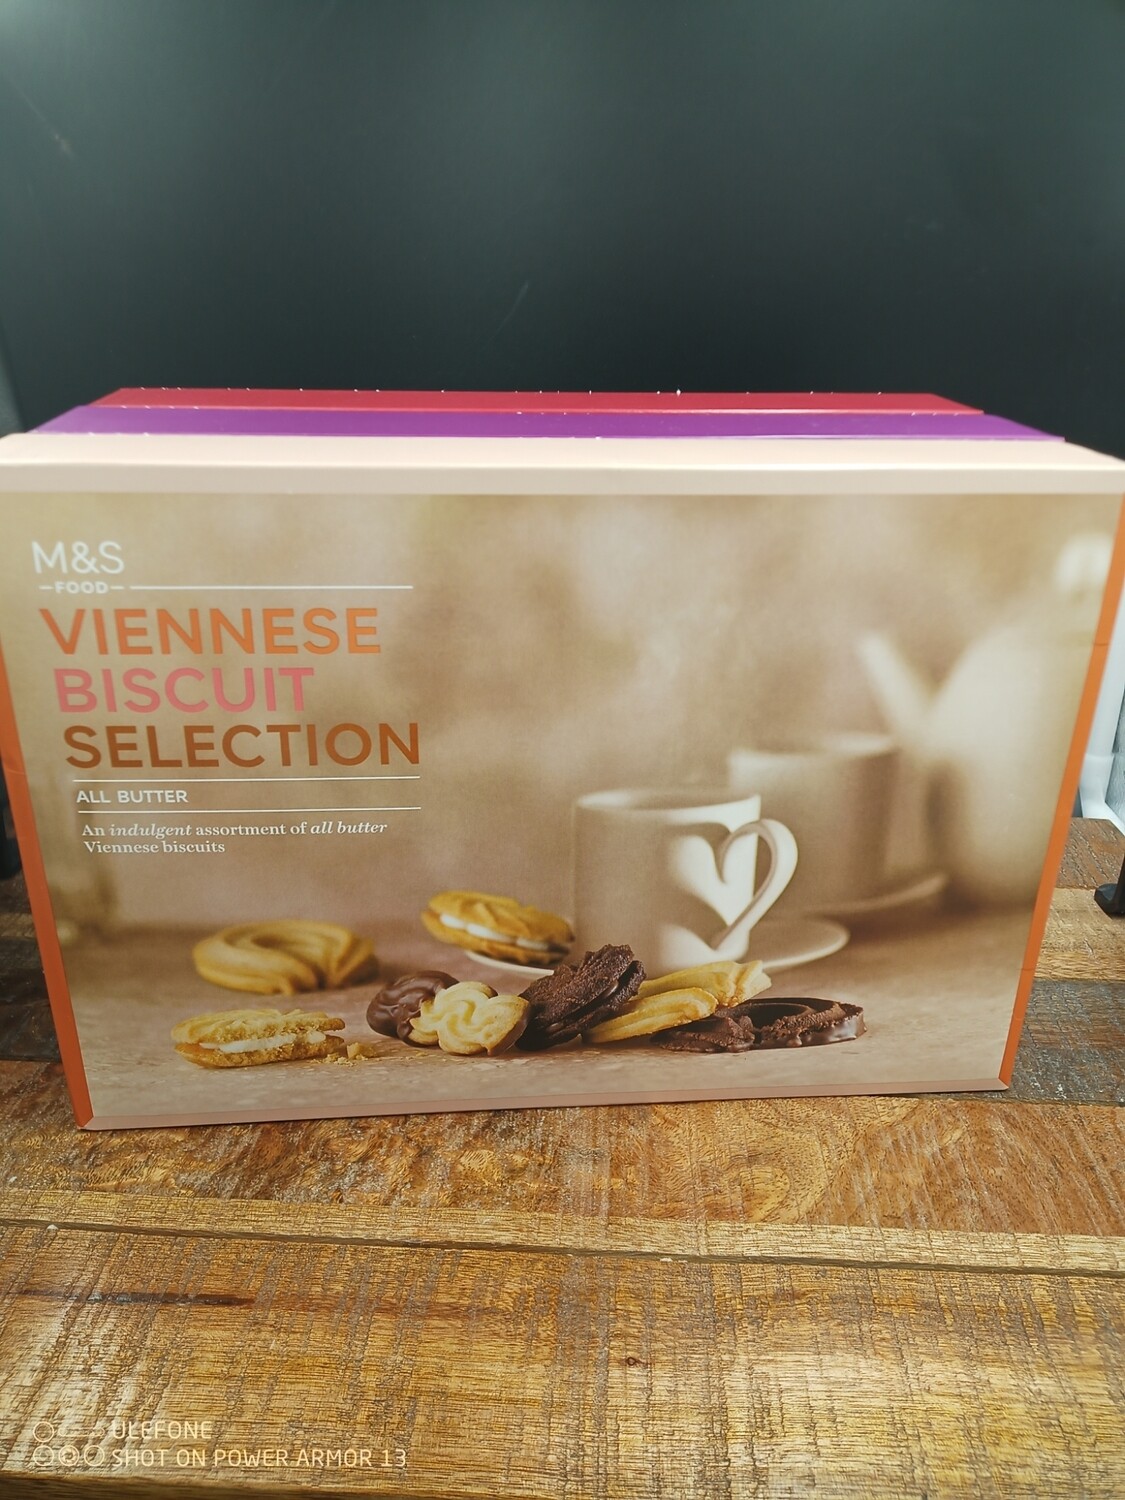 M&S Viennese Selection 450g